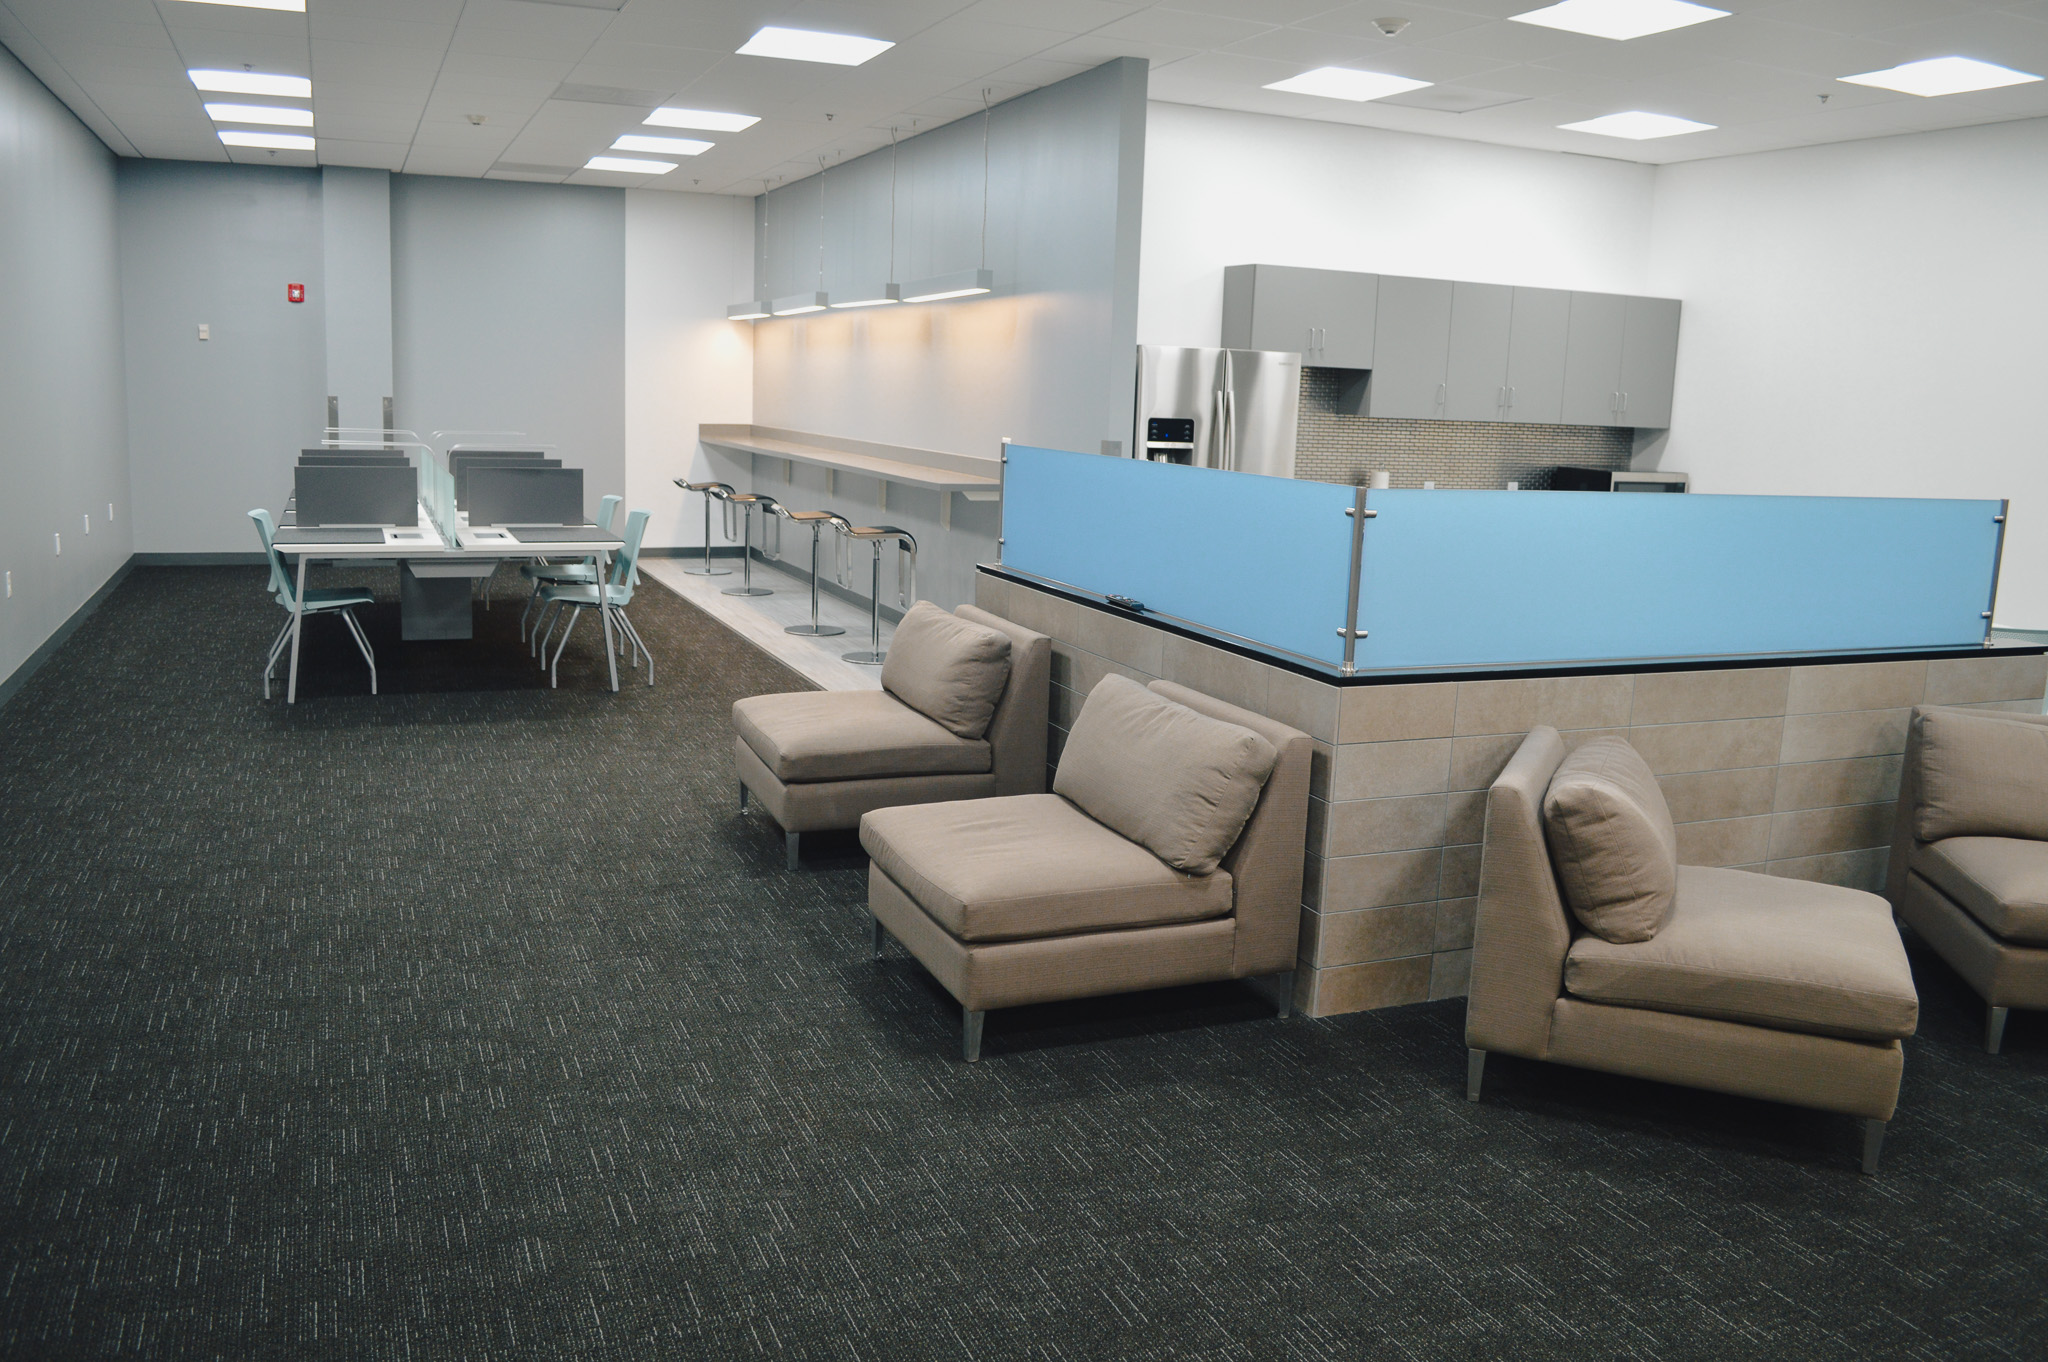 A photograph of a break room or lounge in a data center.